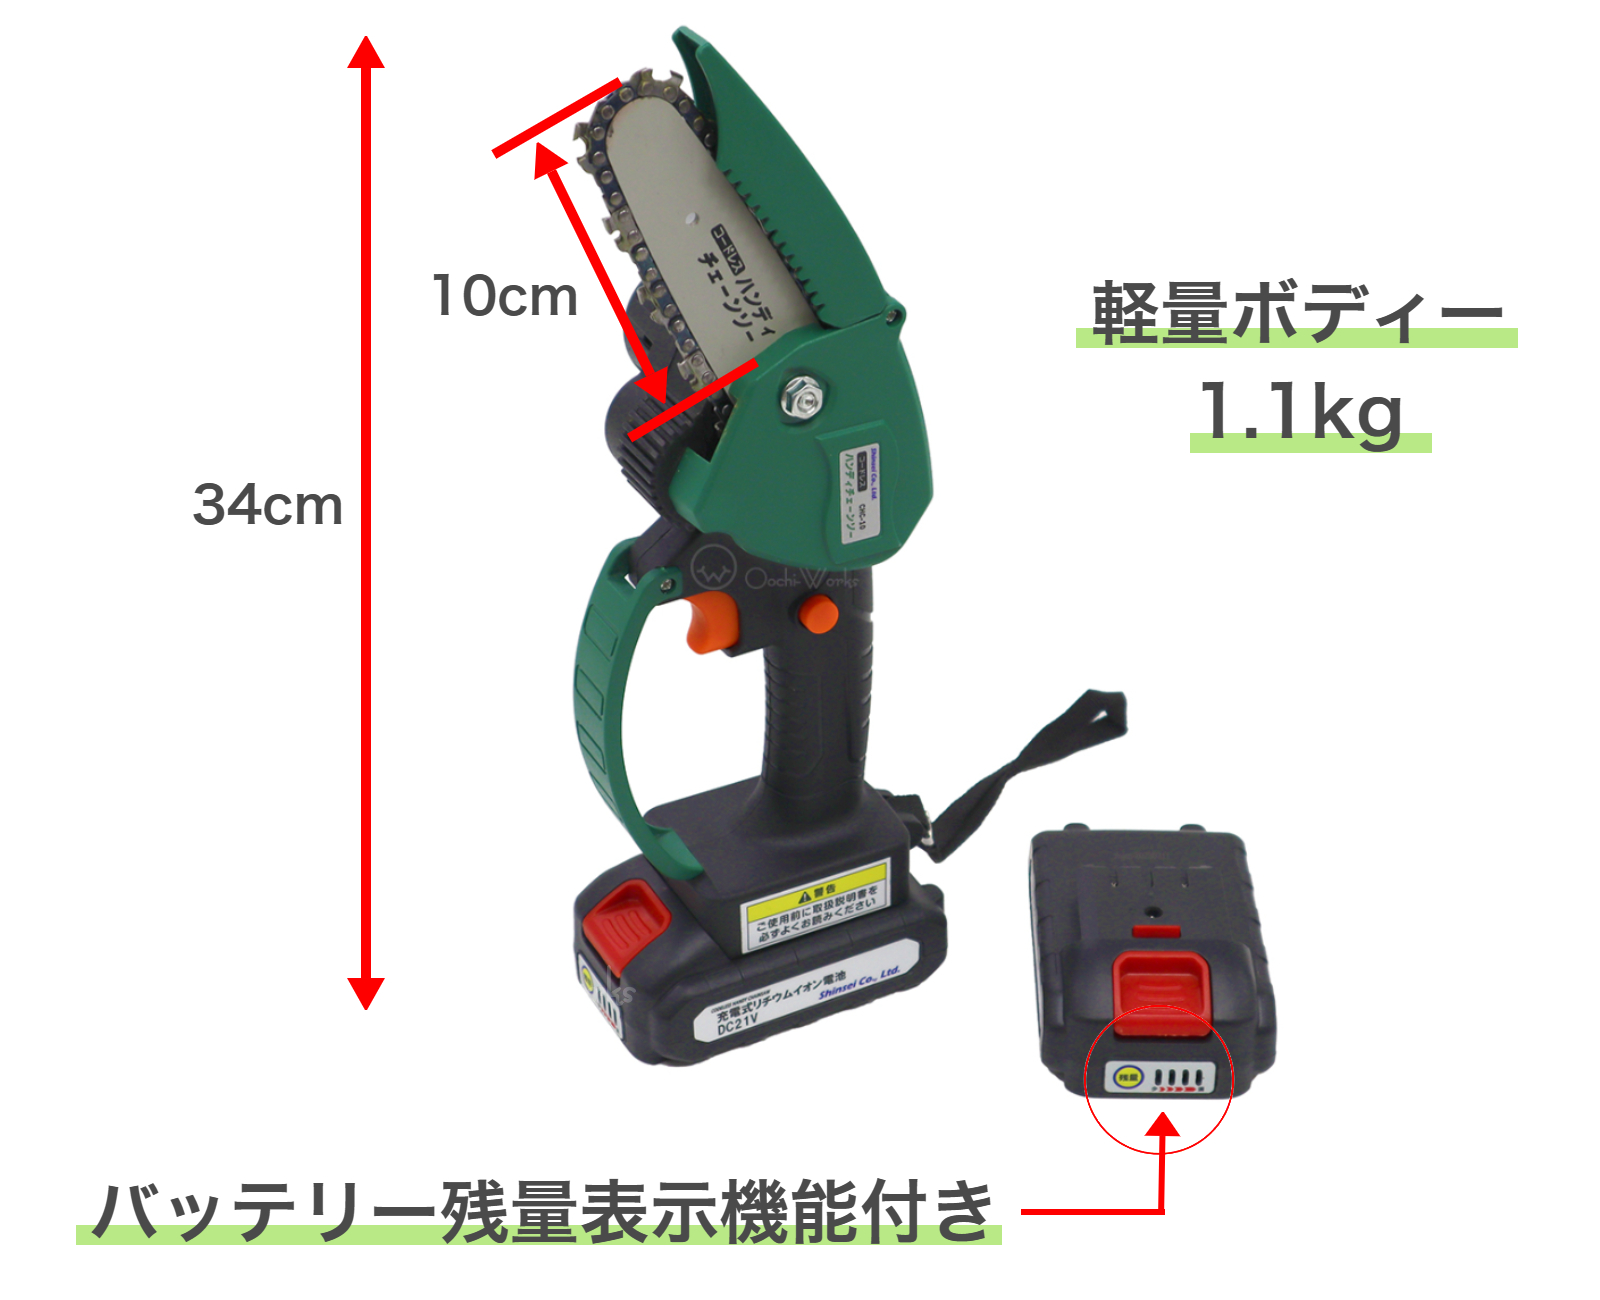  chain saw rechargeable 21V battery 2 piece attaching handy chain saw PSE certification cordless small size chain saw rechargeable handy so- gardening so-